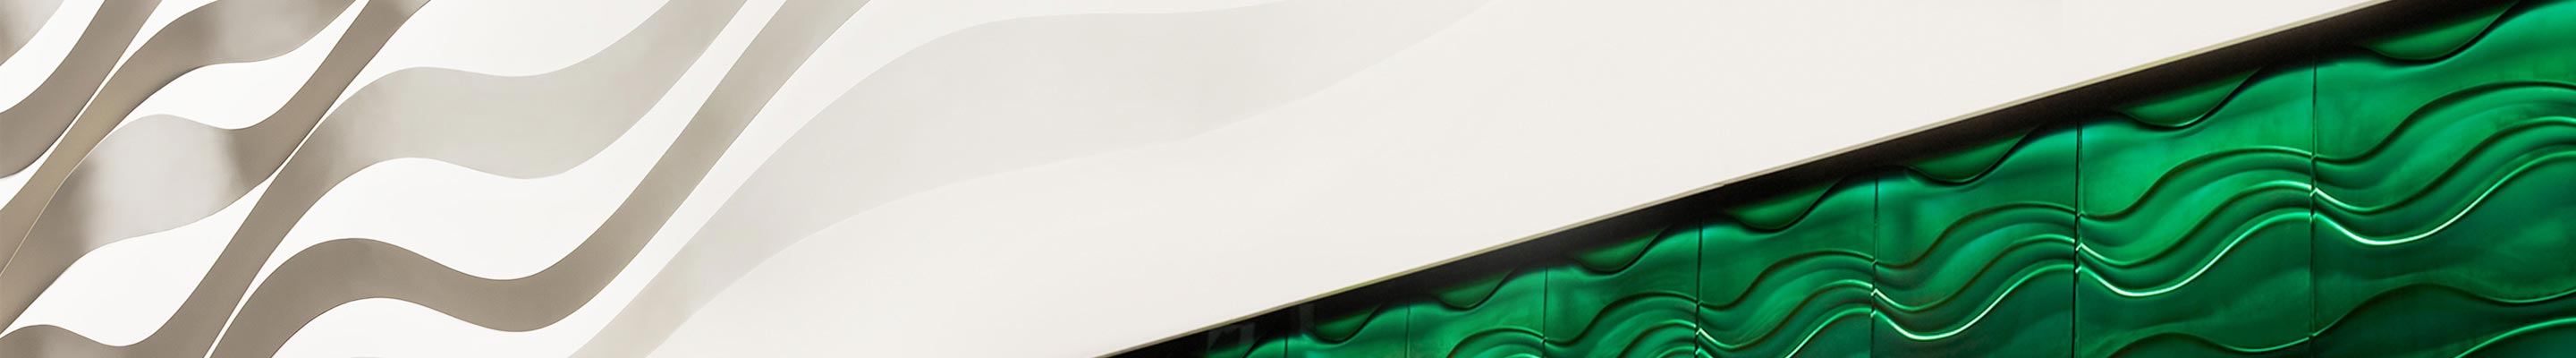 rolex our showrooms header banner